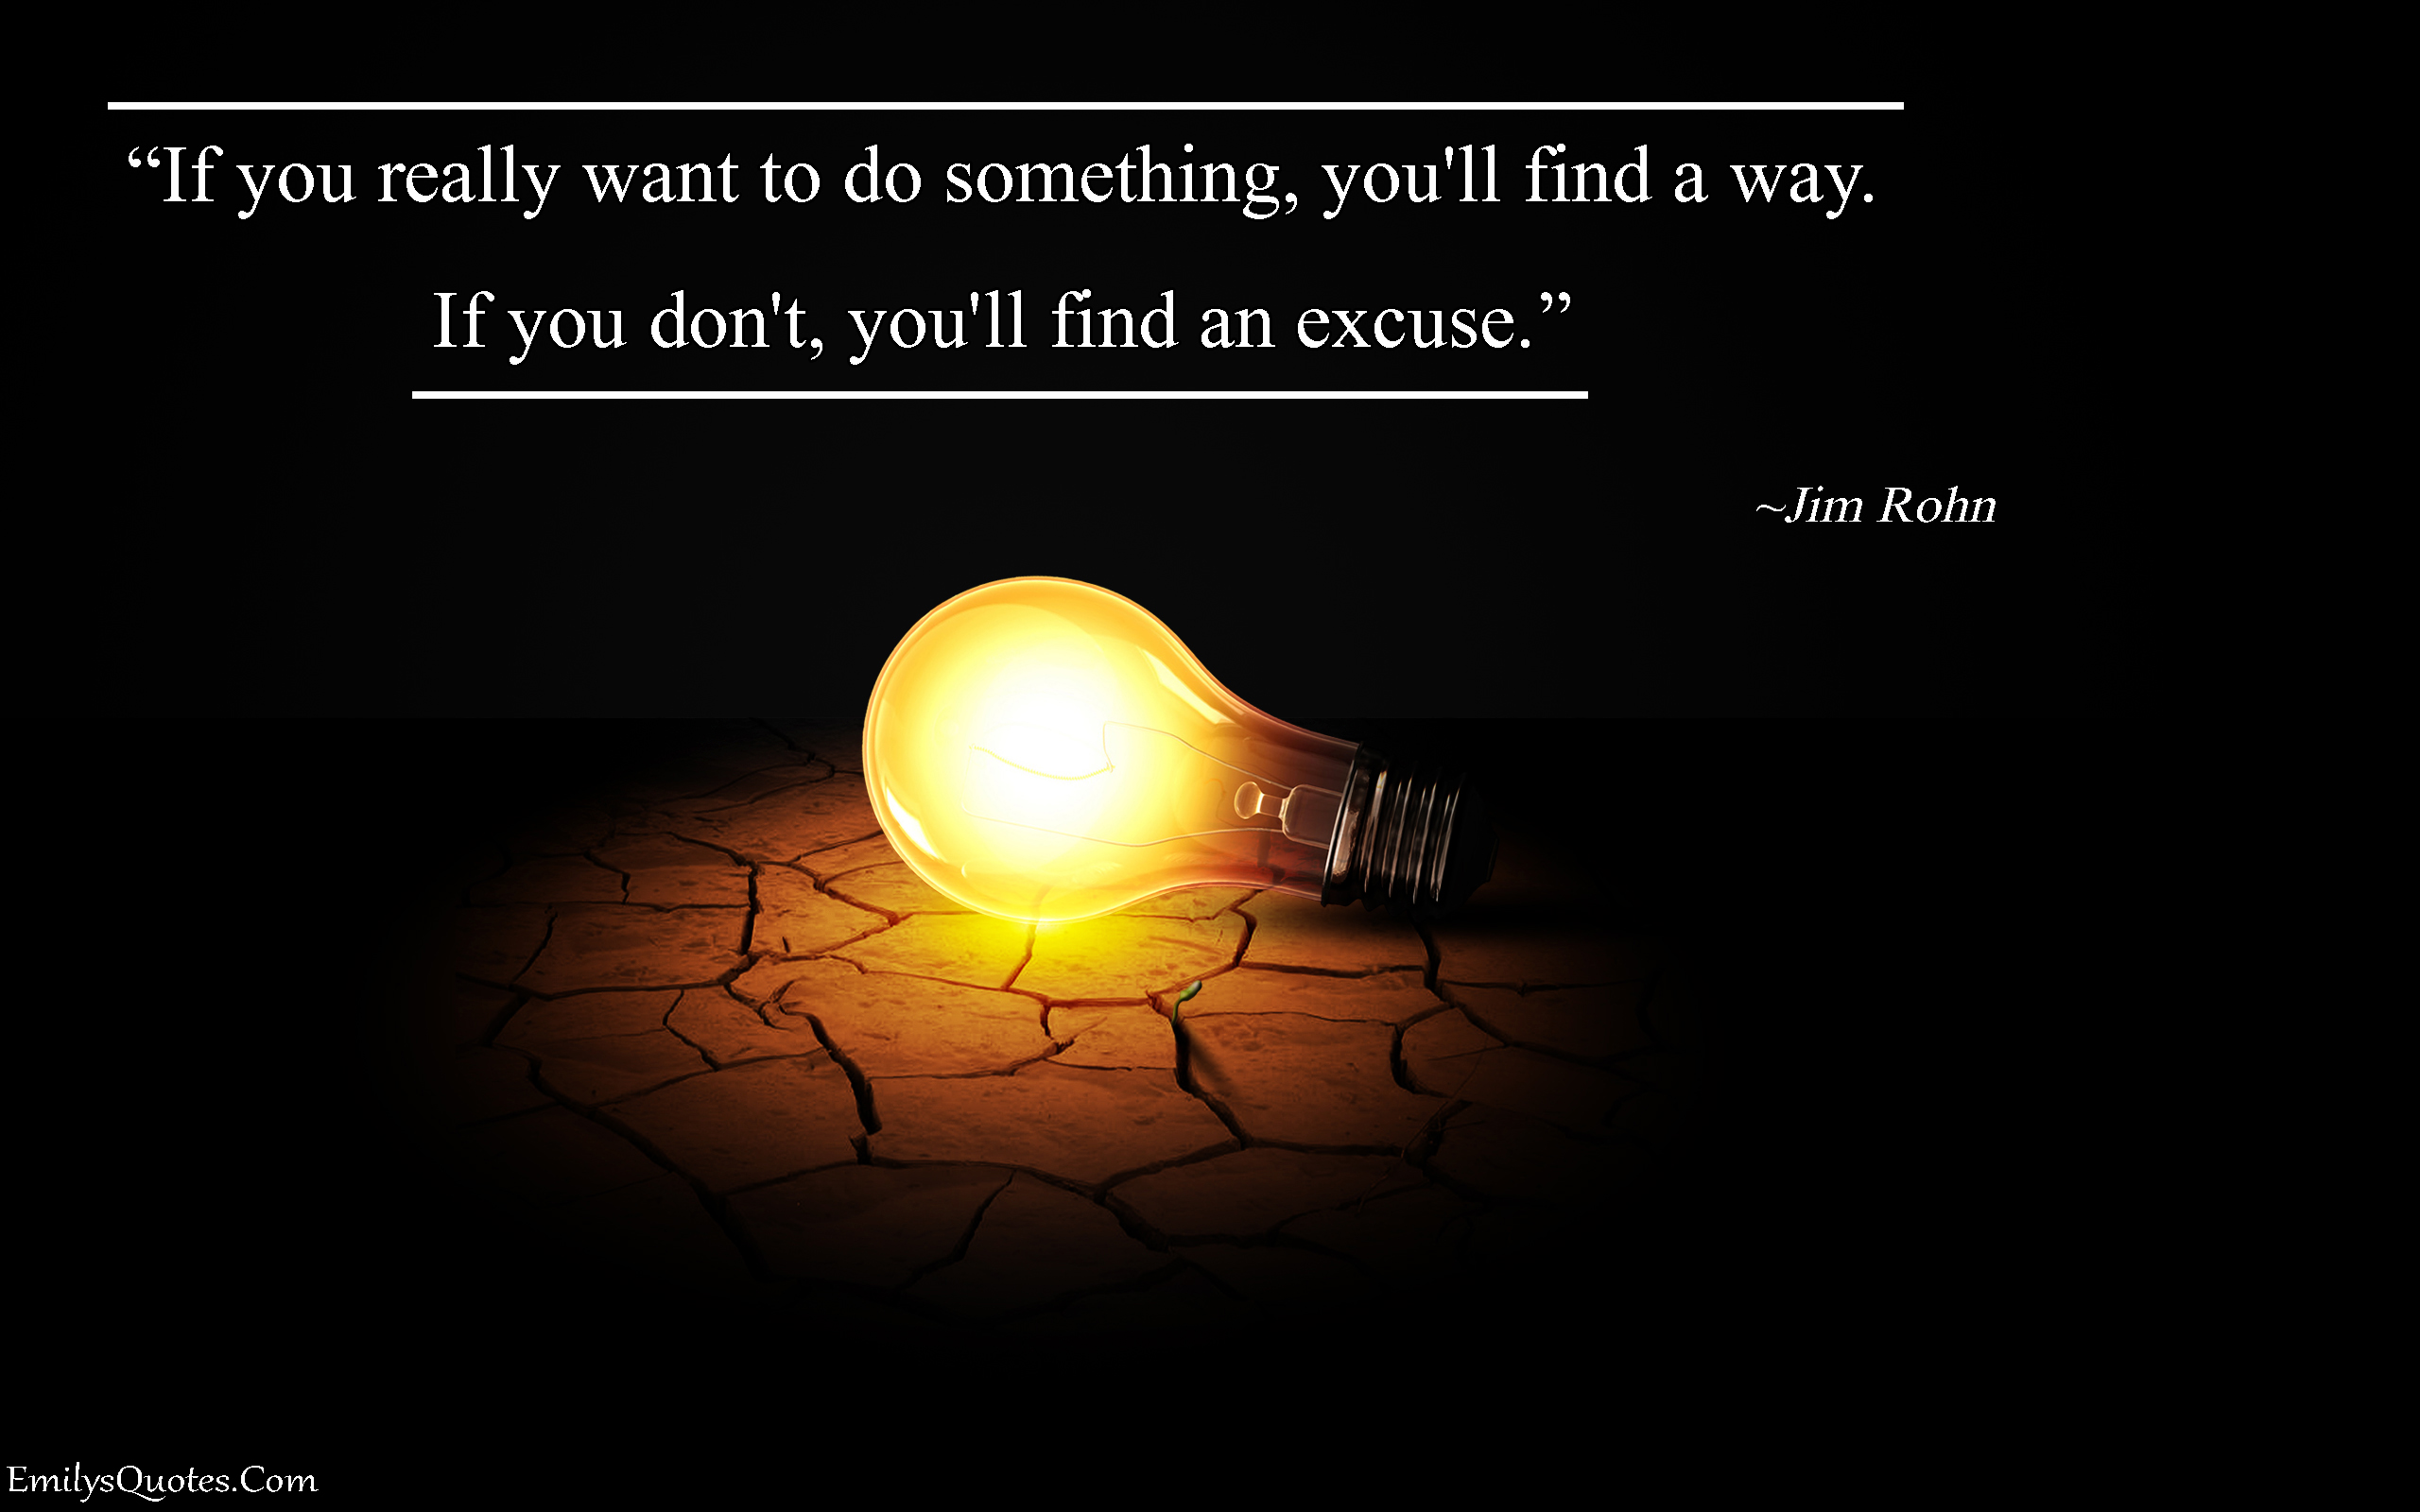 If you really want to do something, you’ll find a way. If you don’t, you’ll find an excuse